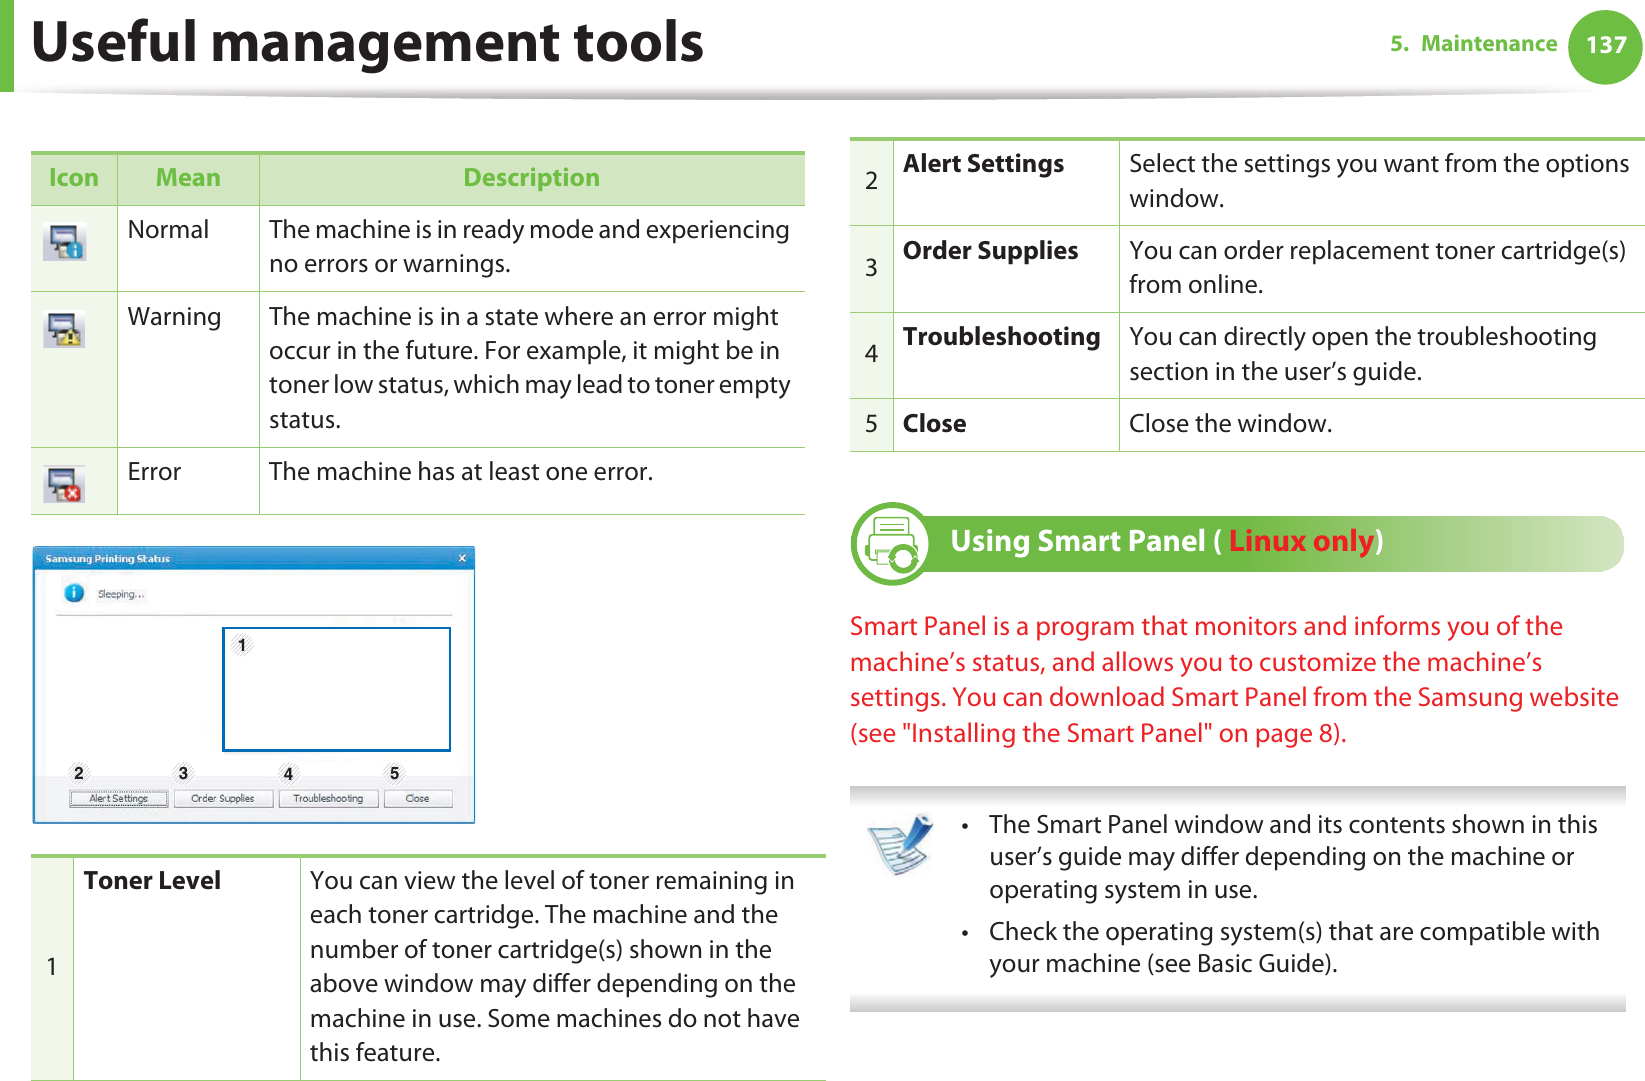 Useful management tools 1375. Maintenance11 Using Smart Panel ( Linux only)Smart Panel is a program that monitors and informs you of the machine’s status, and allows you to customize the machine’s settings. You can download Smart Panel from the Samsung website (see &quot;Installing the Smart Panel&quot; on page 8). • The Smart Panel window and its contents shown in this user’s guide may differ depending on the machine or operating system in use.• Check the operating system(s) that are compatible with your machine (see Basic Guide). Icon Mean DescriptionNormal The machine is in ready mode and experiencing no errors or warnings.Warning The machine is in a state where an error might occur in the future. For example, it might be in toner low status, which may lead to toner empty status. Error The machine has at least one error.1Toner Level You can view the level of toner remaining in each toner cartridge. The machine and the number of toner cartridge(s) shown in the above window may differ depending on the machine in use. Some machines do not have this feature.134 2 52Alert Settings Select the settings you want from the options window. 3Order Supplies You can order replacement toner cartridge(s) from online.4Troubleshooting You can directly open the troubleshooting section in the user’s guide.5Close Close the window.